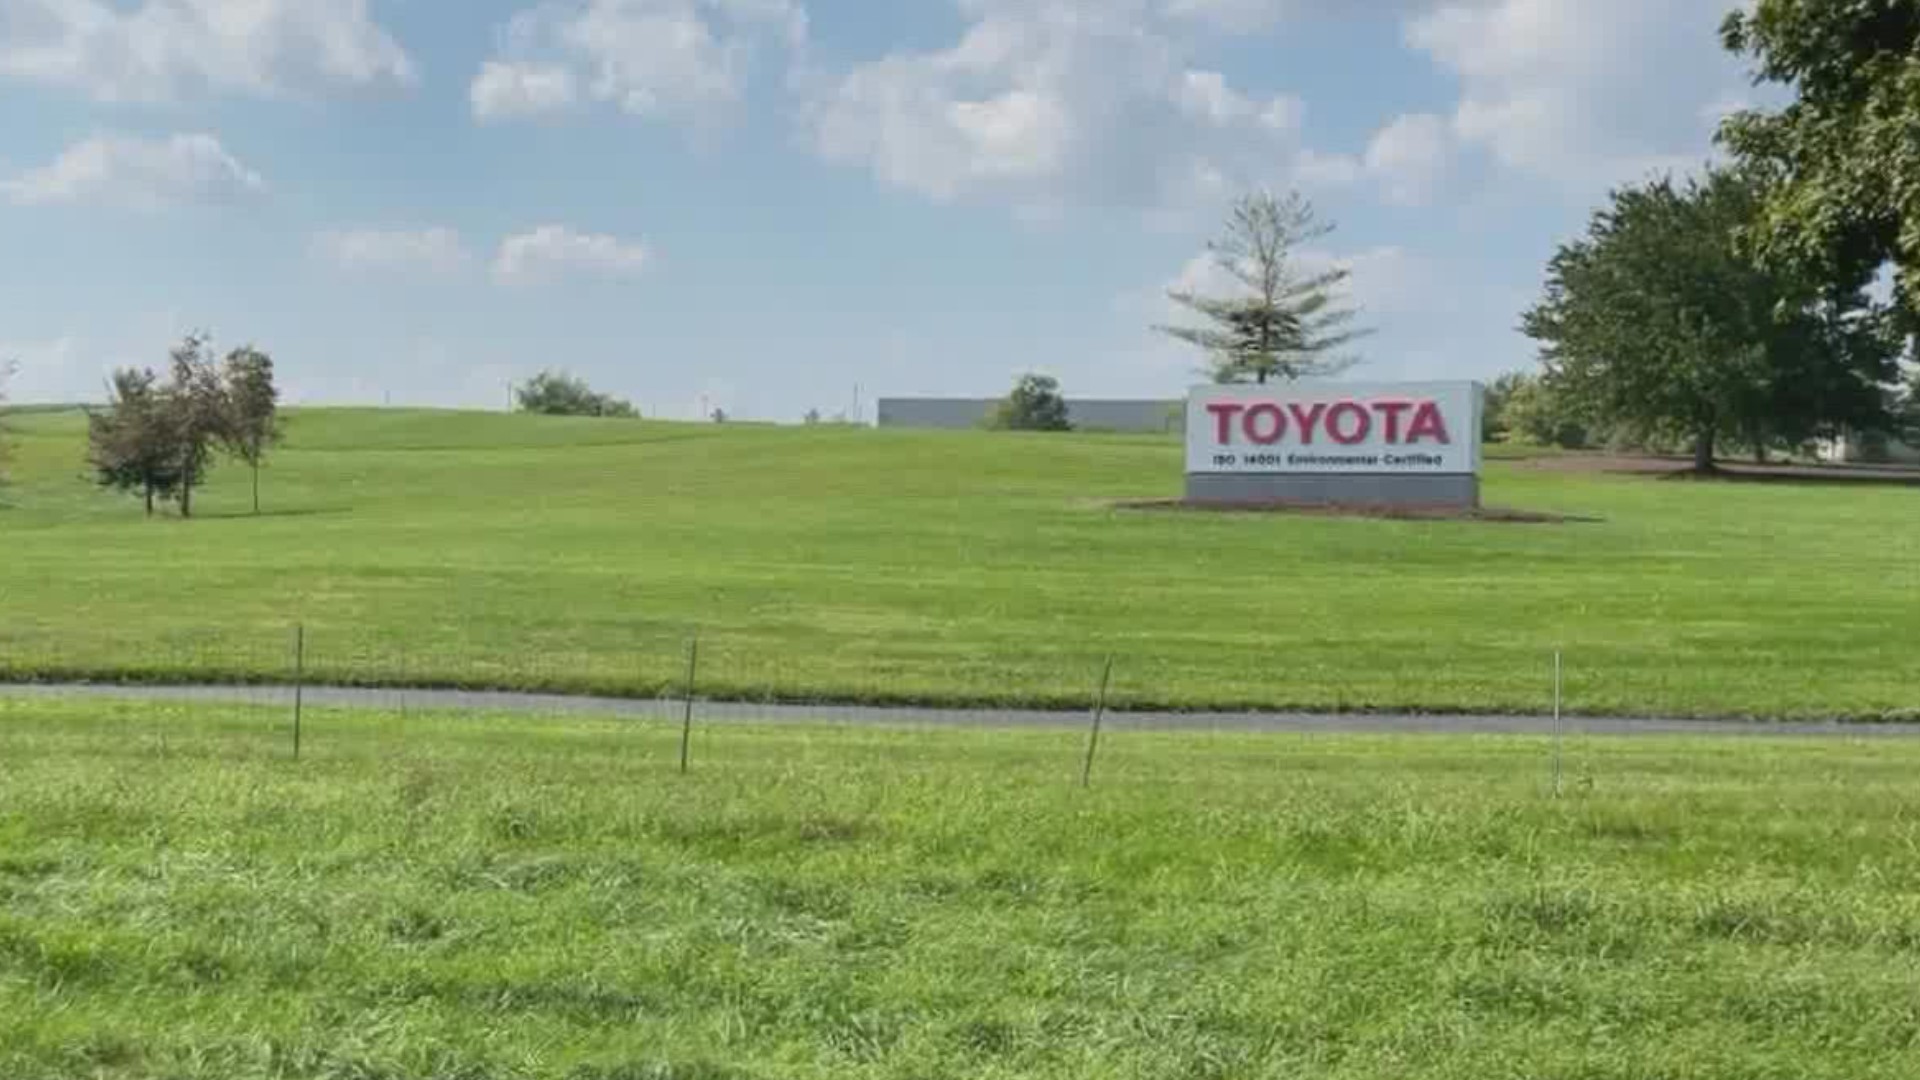 Toyota brought in almost the same number of people to work at the Georgetown plant as the town's population. It also tripled the area's overall population.